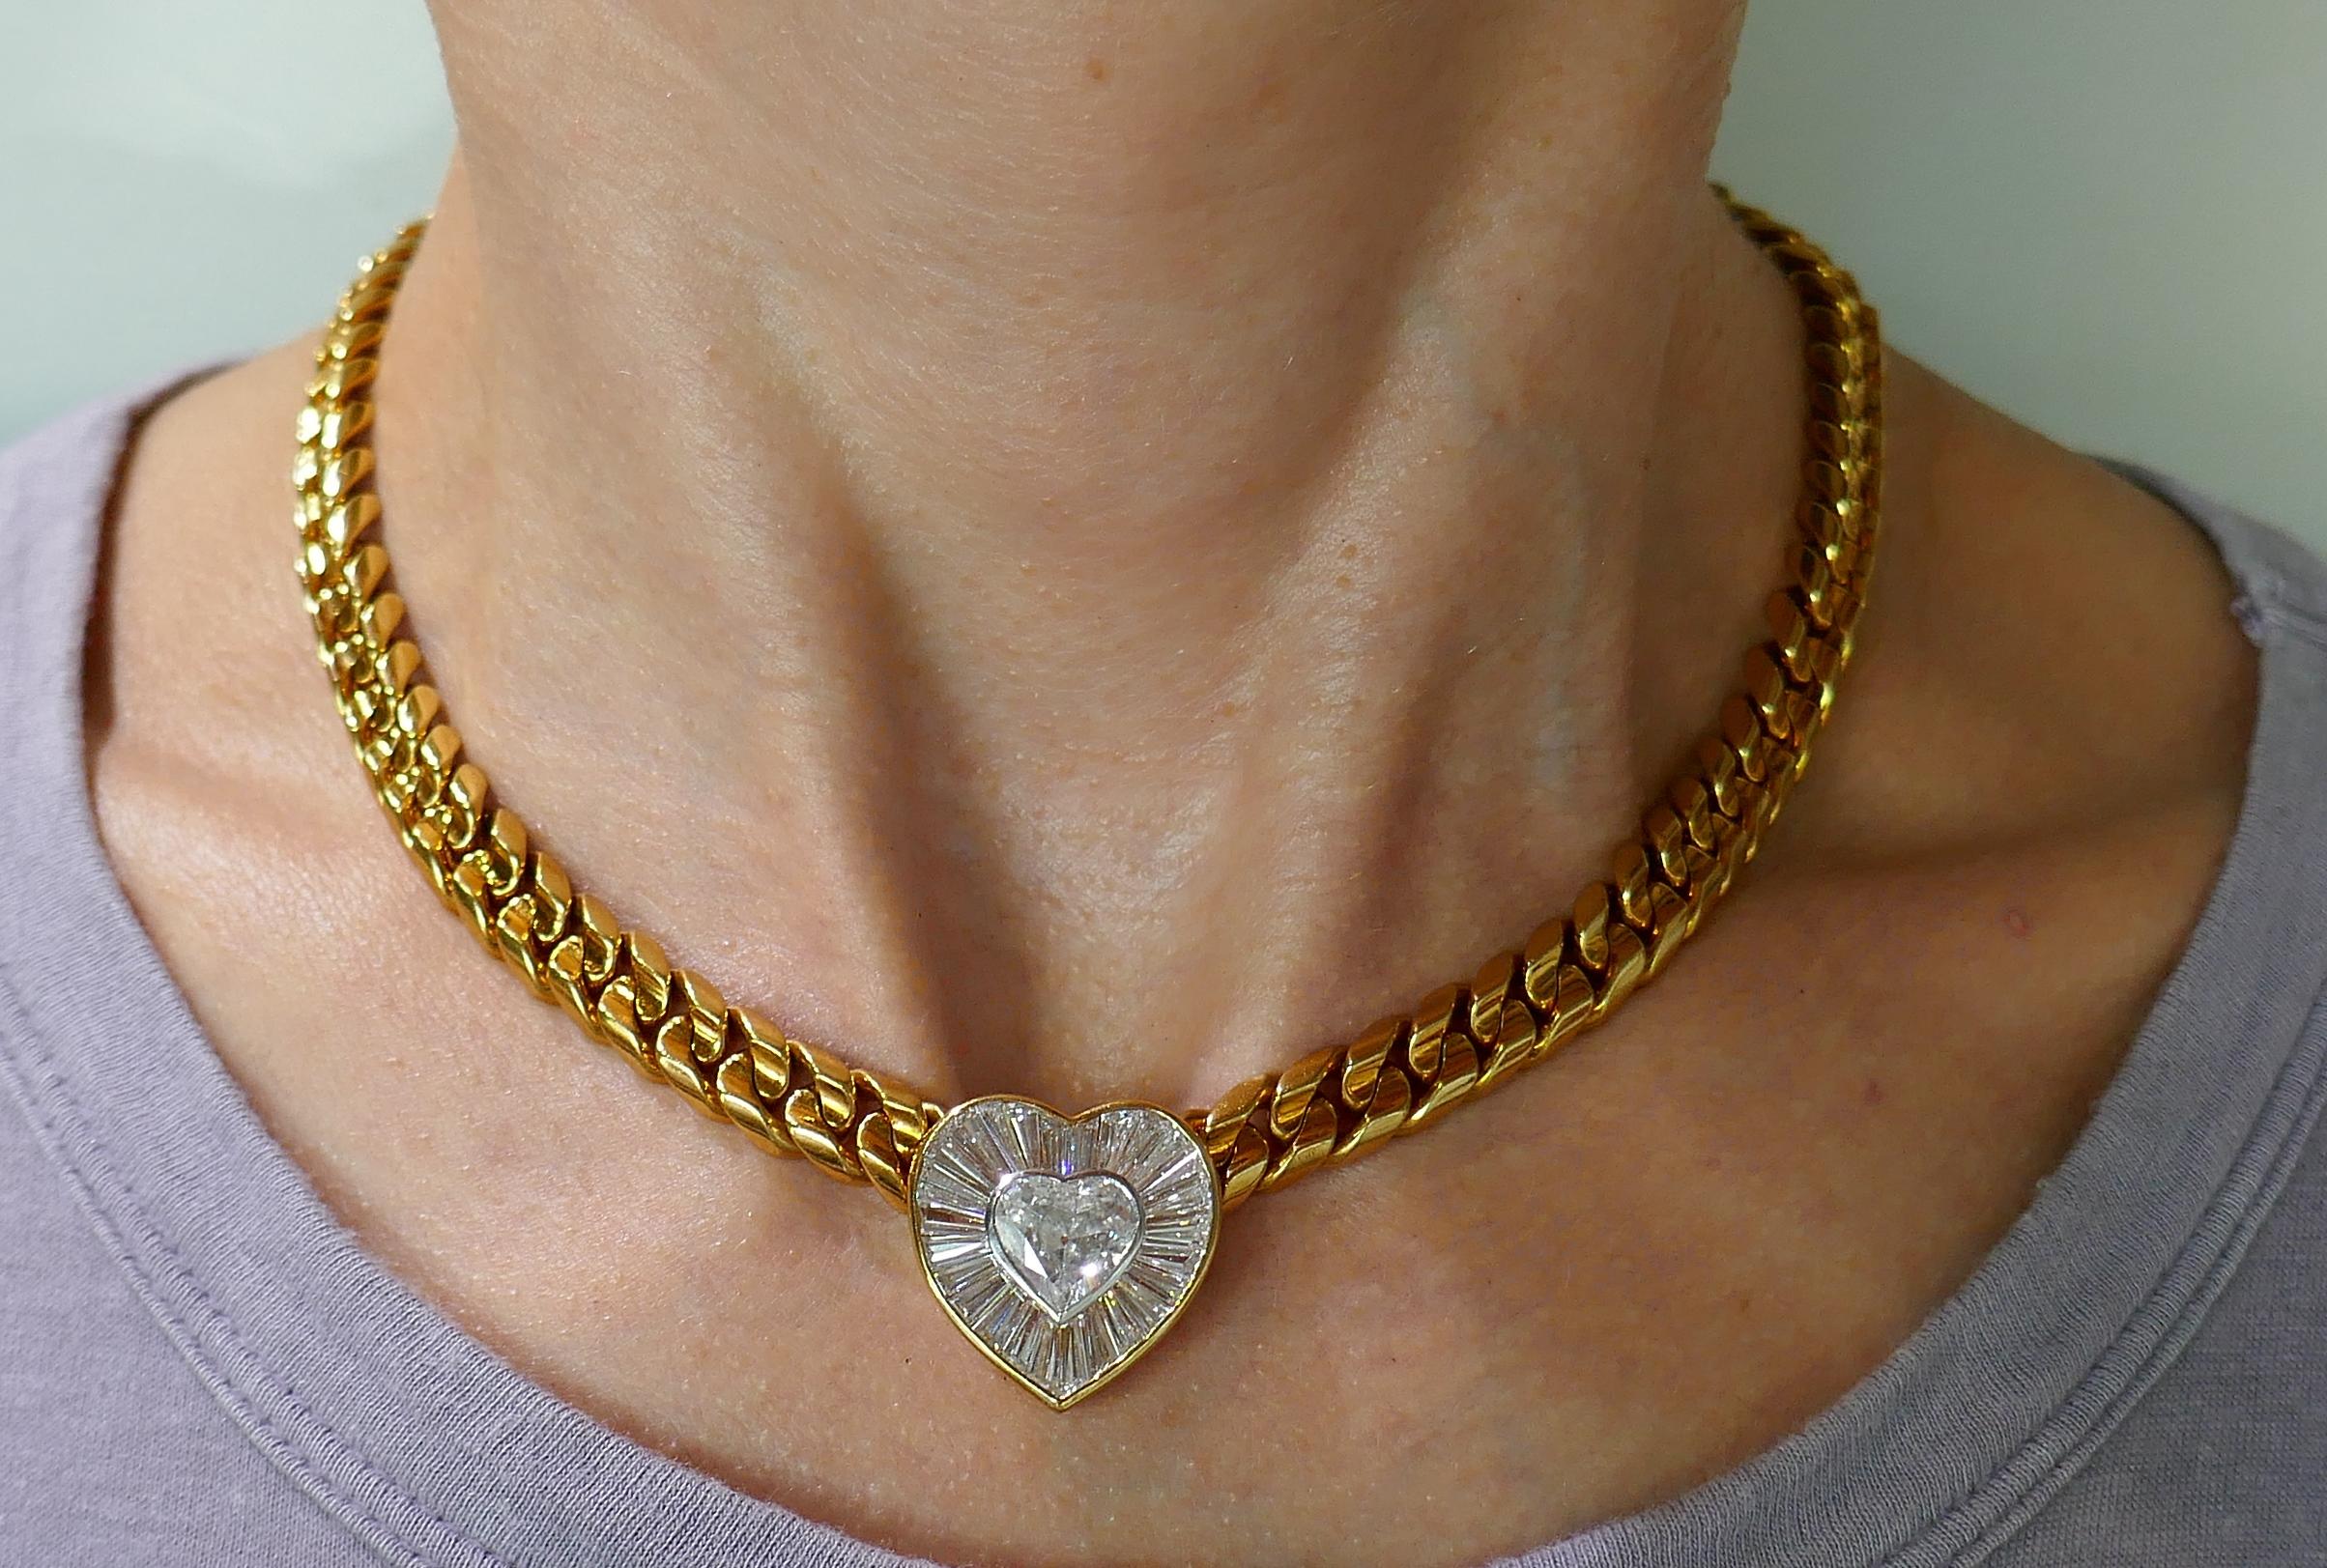 Gorgeous classy diamond and yellow gold necklace created by Bulgari in Italy in the 1980's. It features a 2.21-ct heart-shape diamond accented with a wide frame of baguette cut diamonds set in 18 karat yellow gold. 
The heart pendant is 7/8